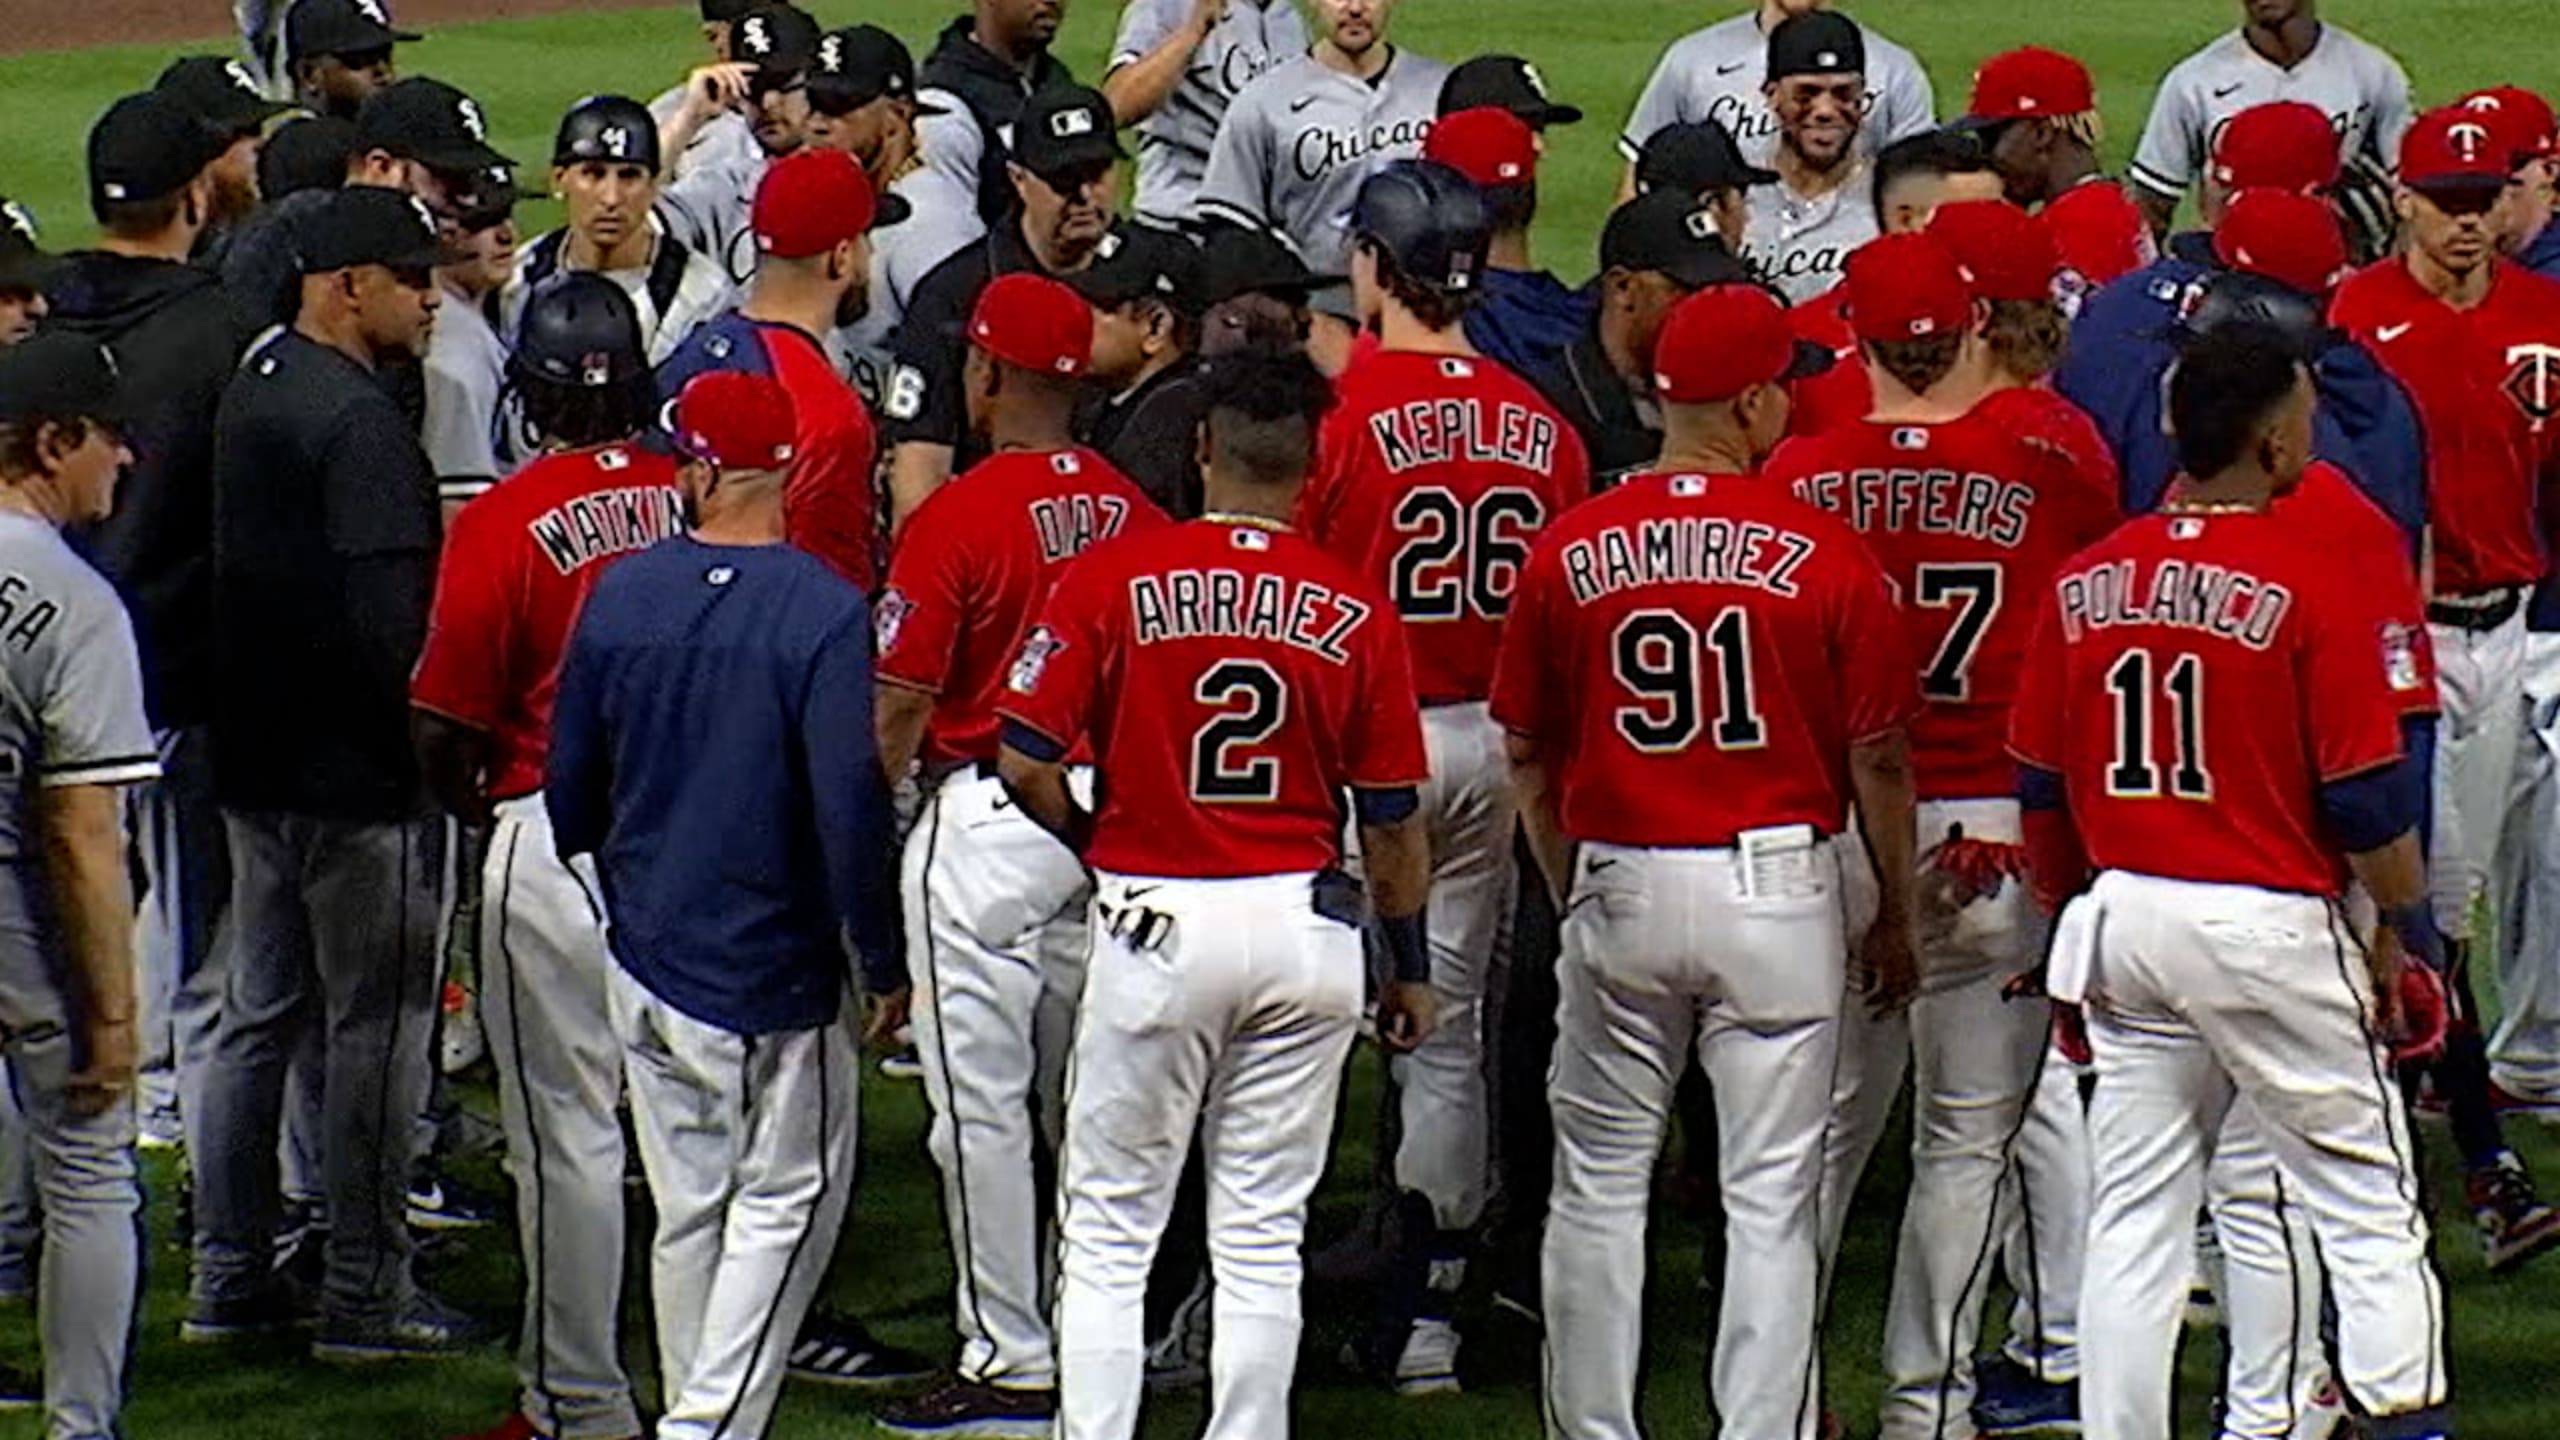 Benches clear after final out